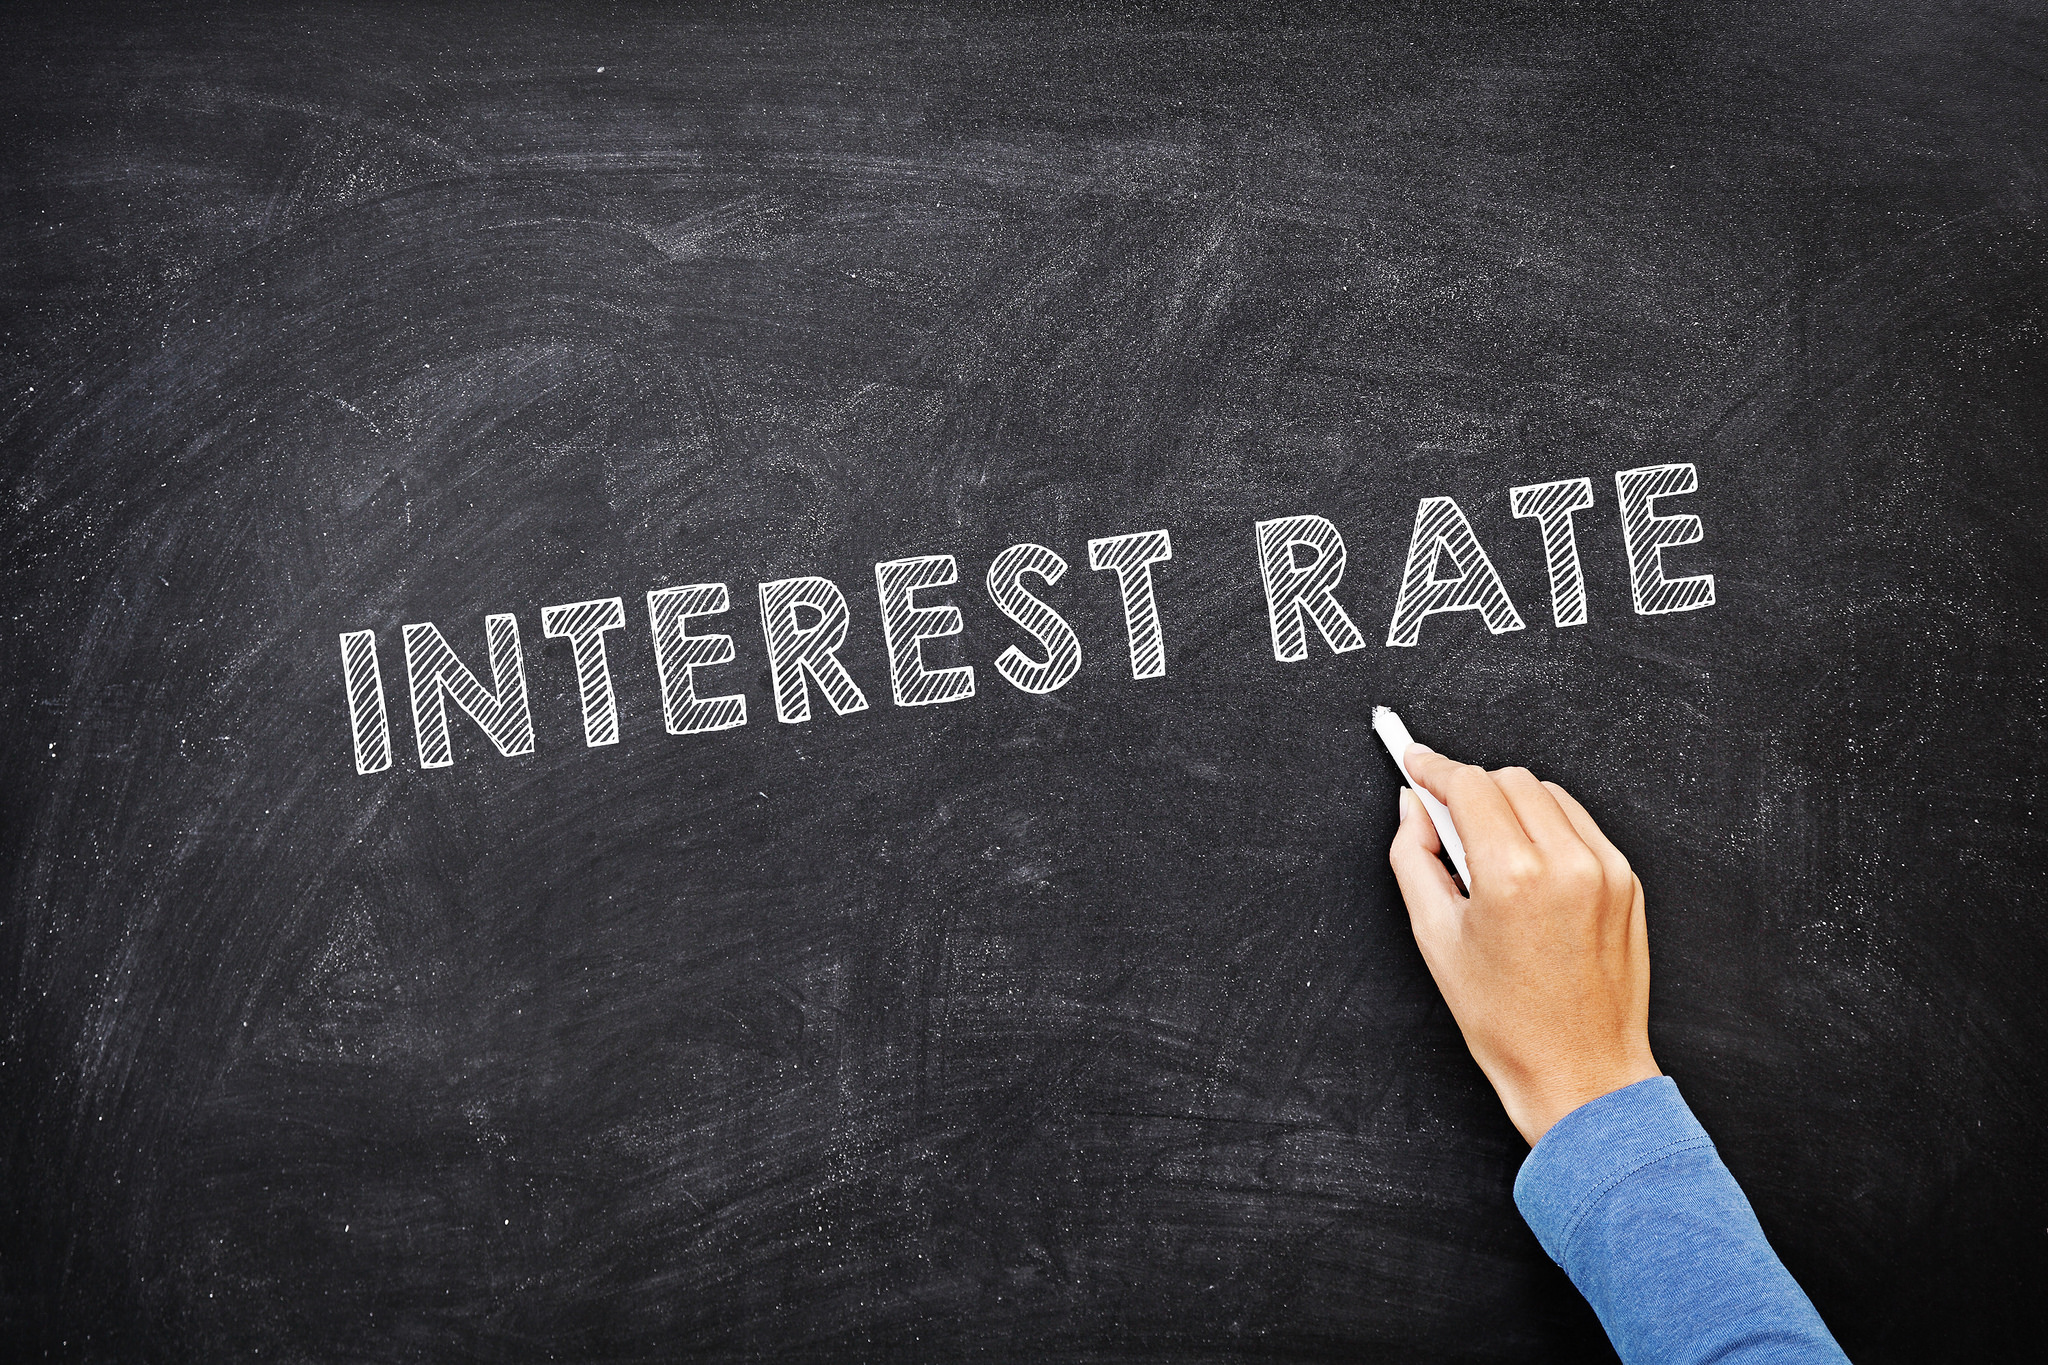 "Interest Rate" written on chalkboard to show March 2nd interest rate hike.